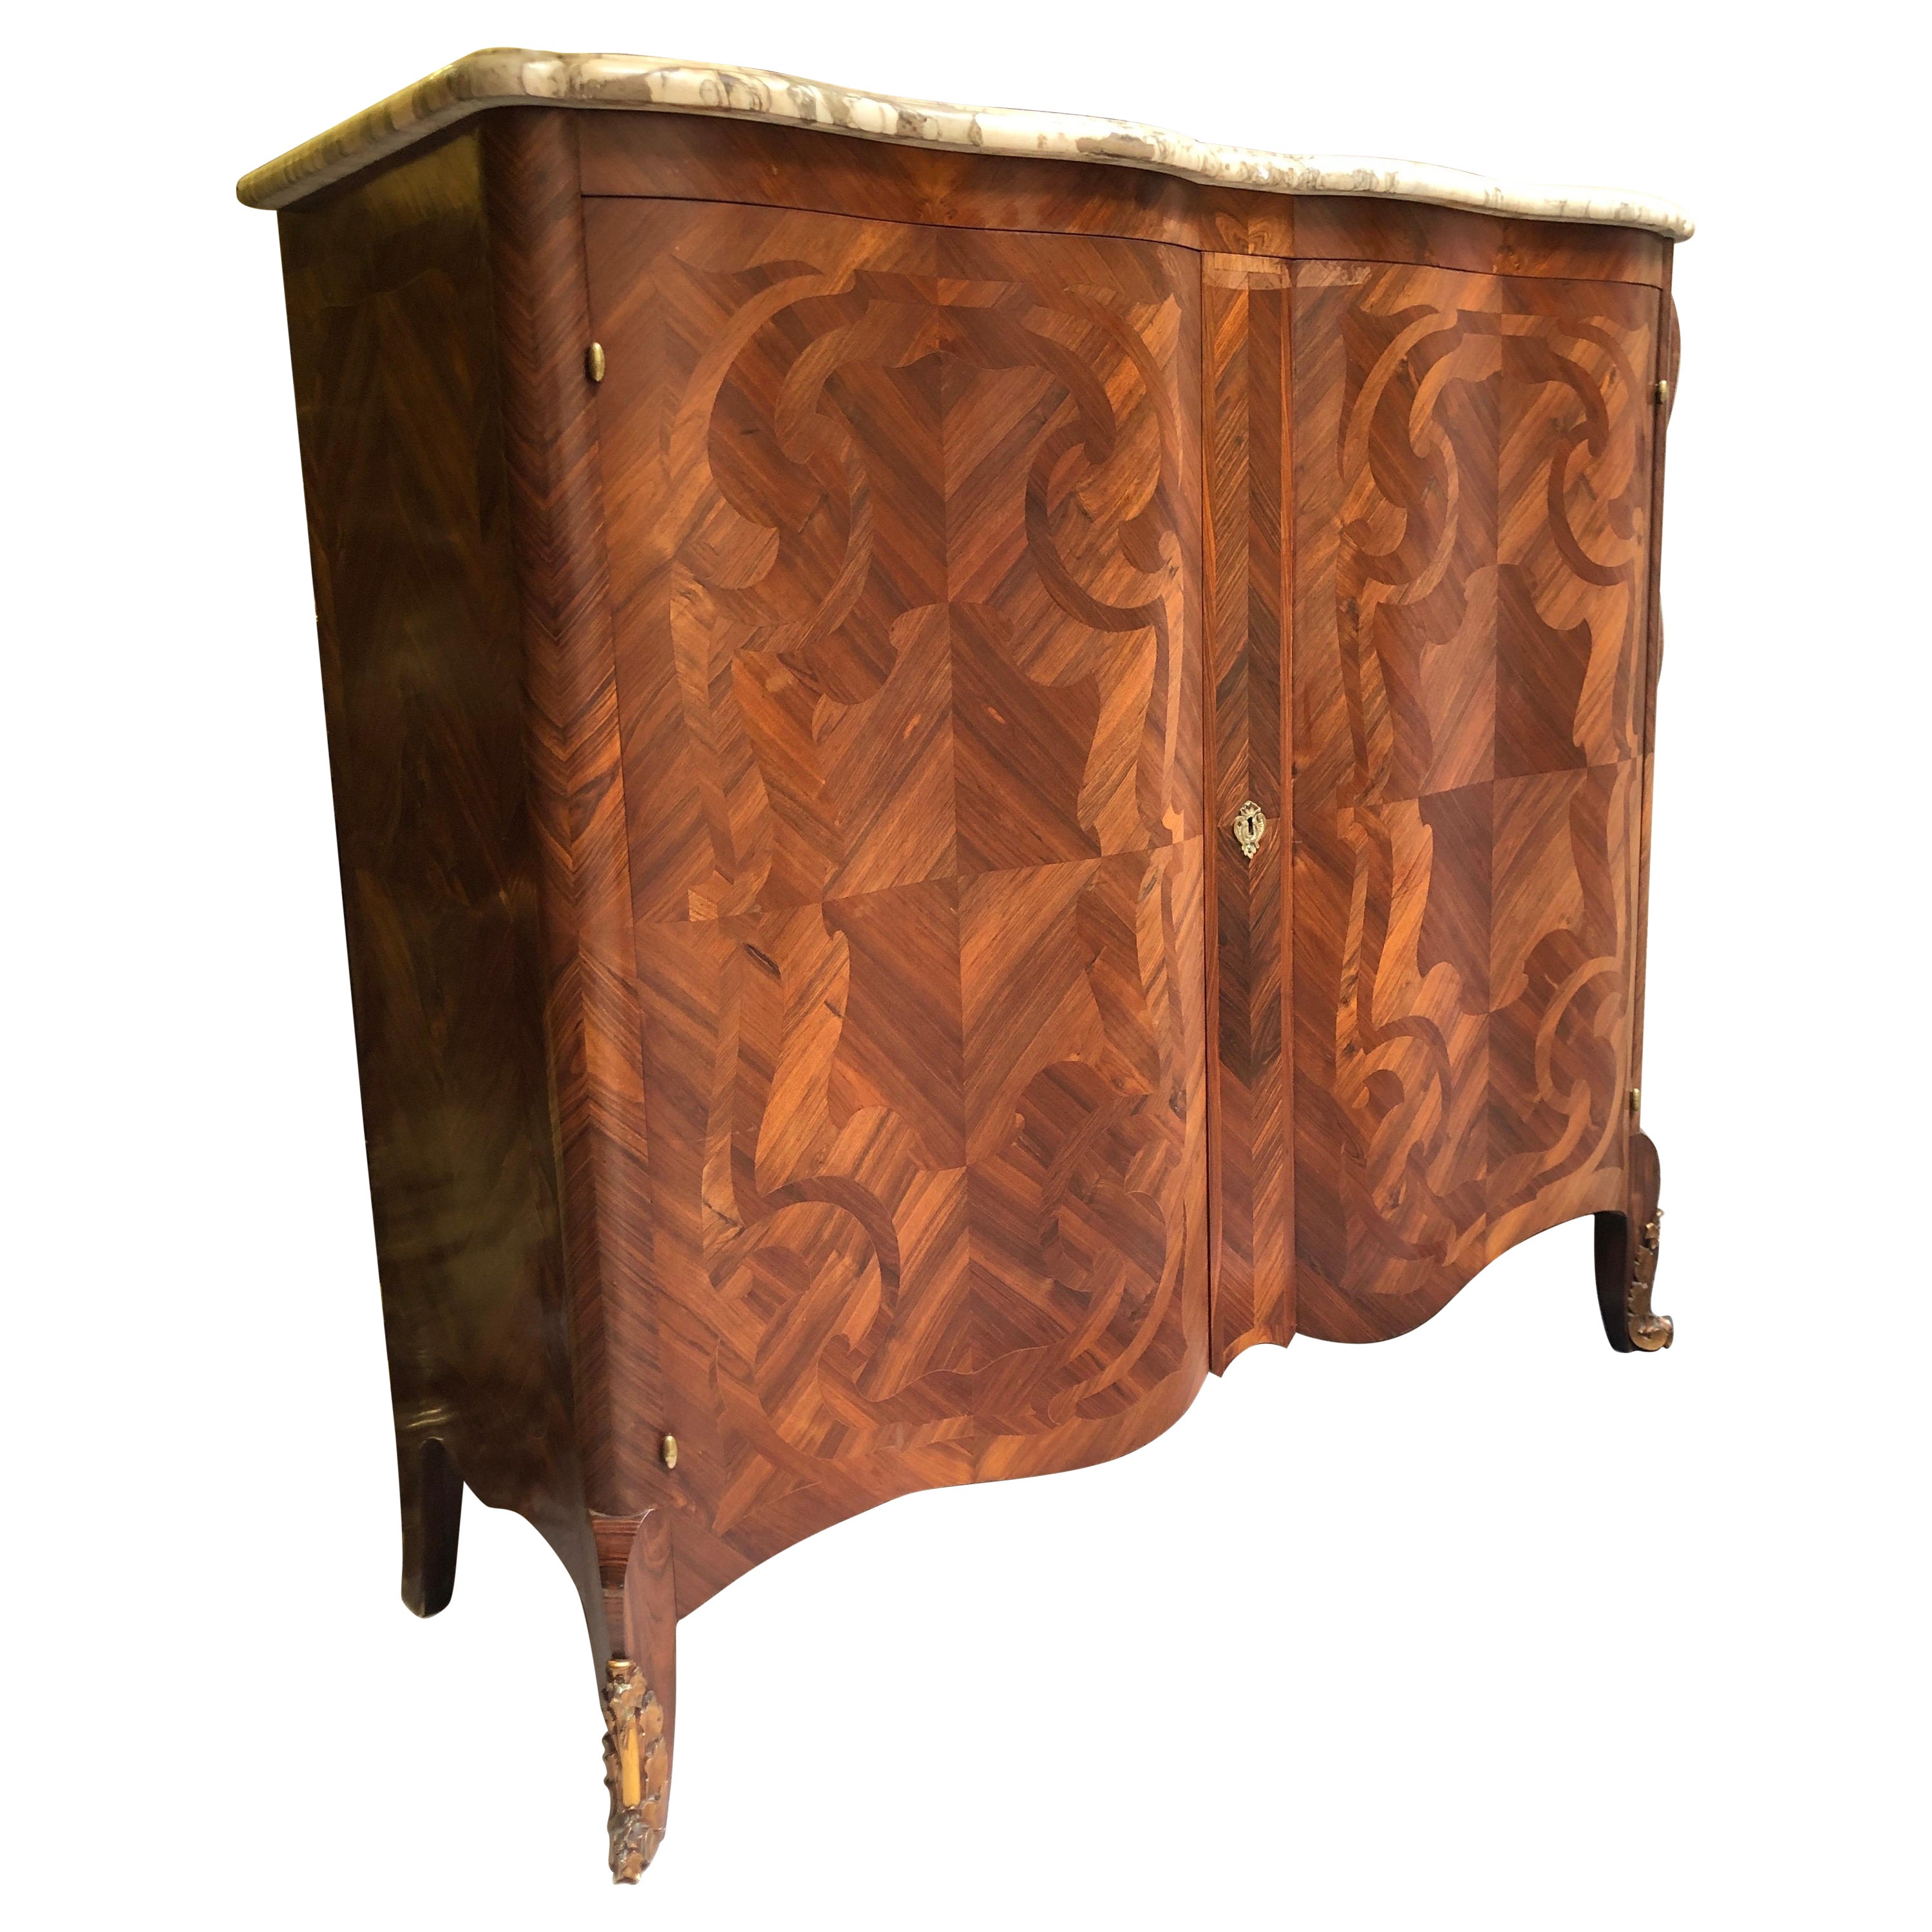 20th Century French Mahogany Inlay Serpentine Marble Top Commode